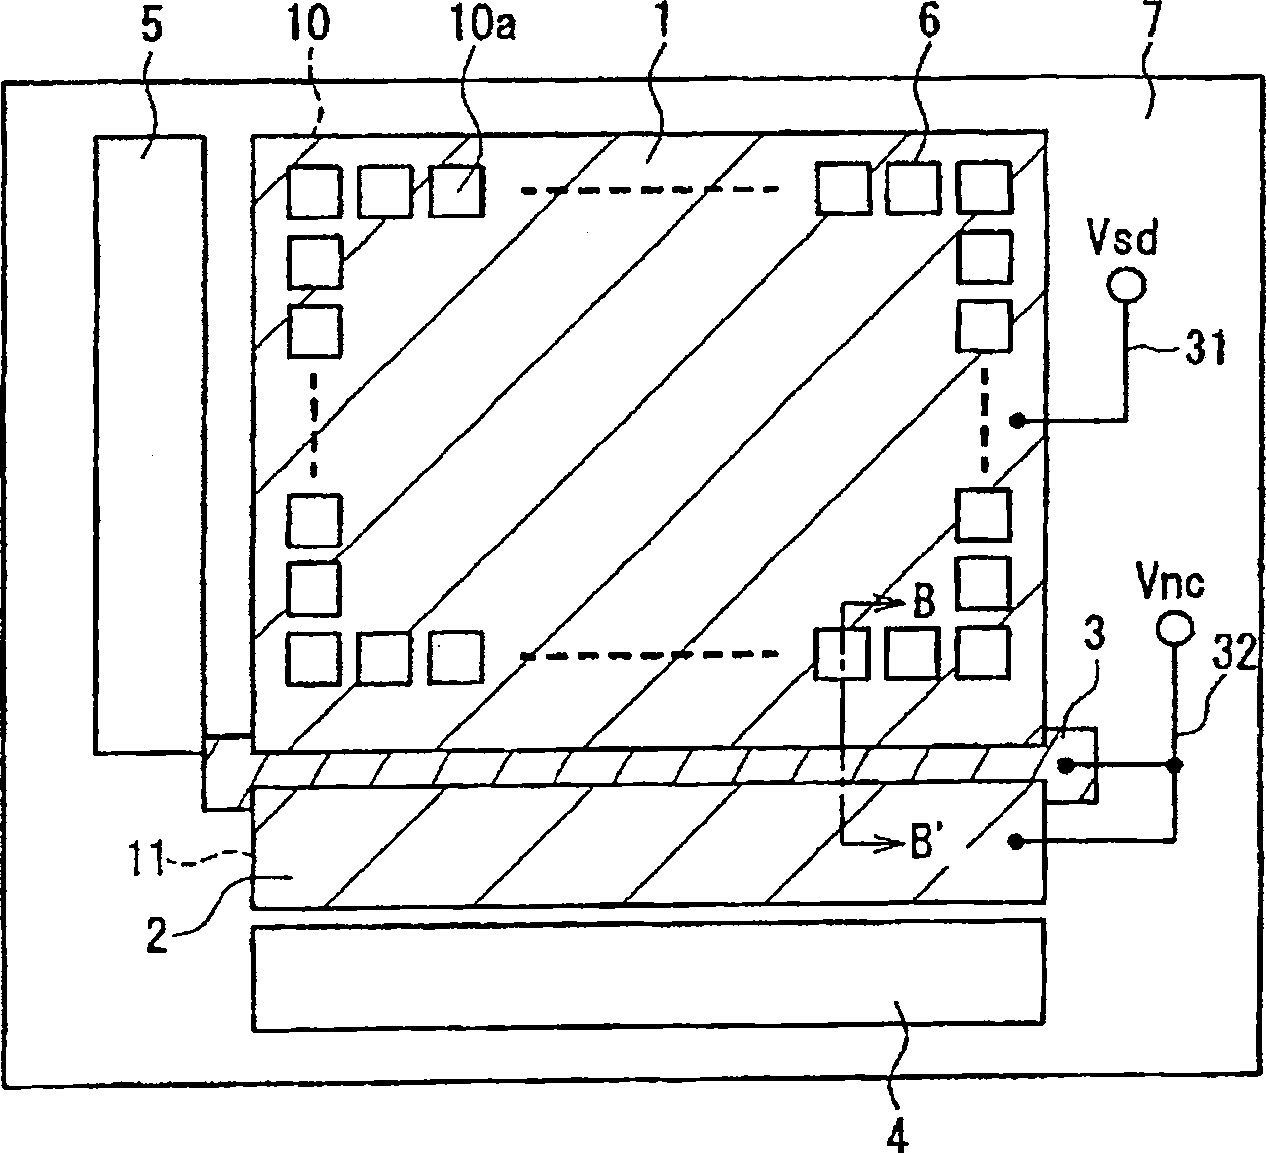 Amplification type solid state imaging device